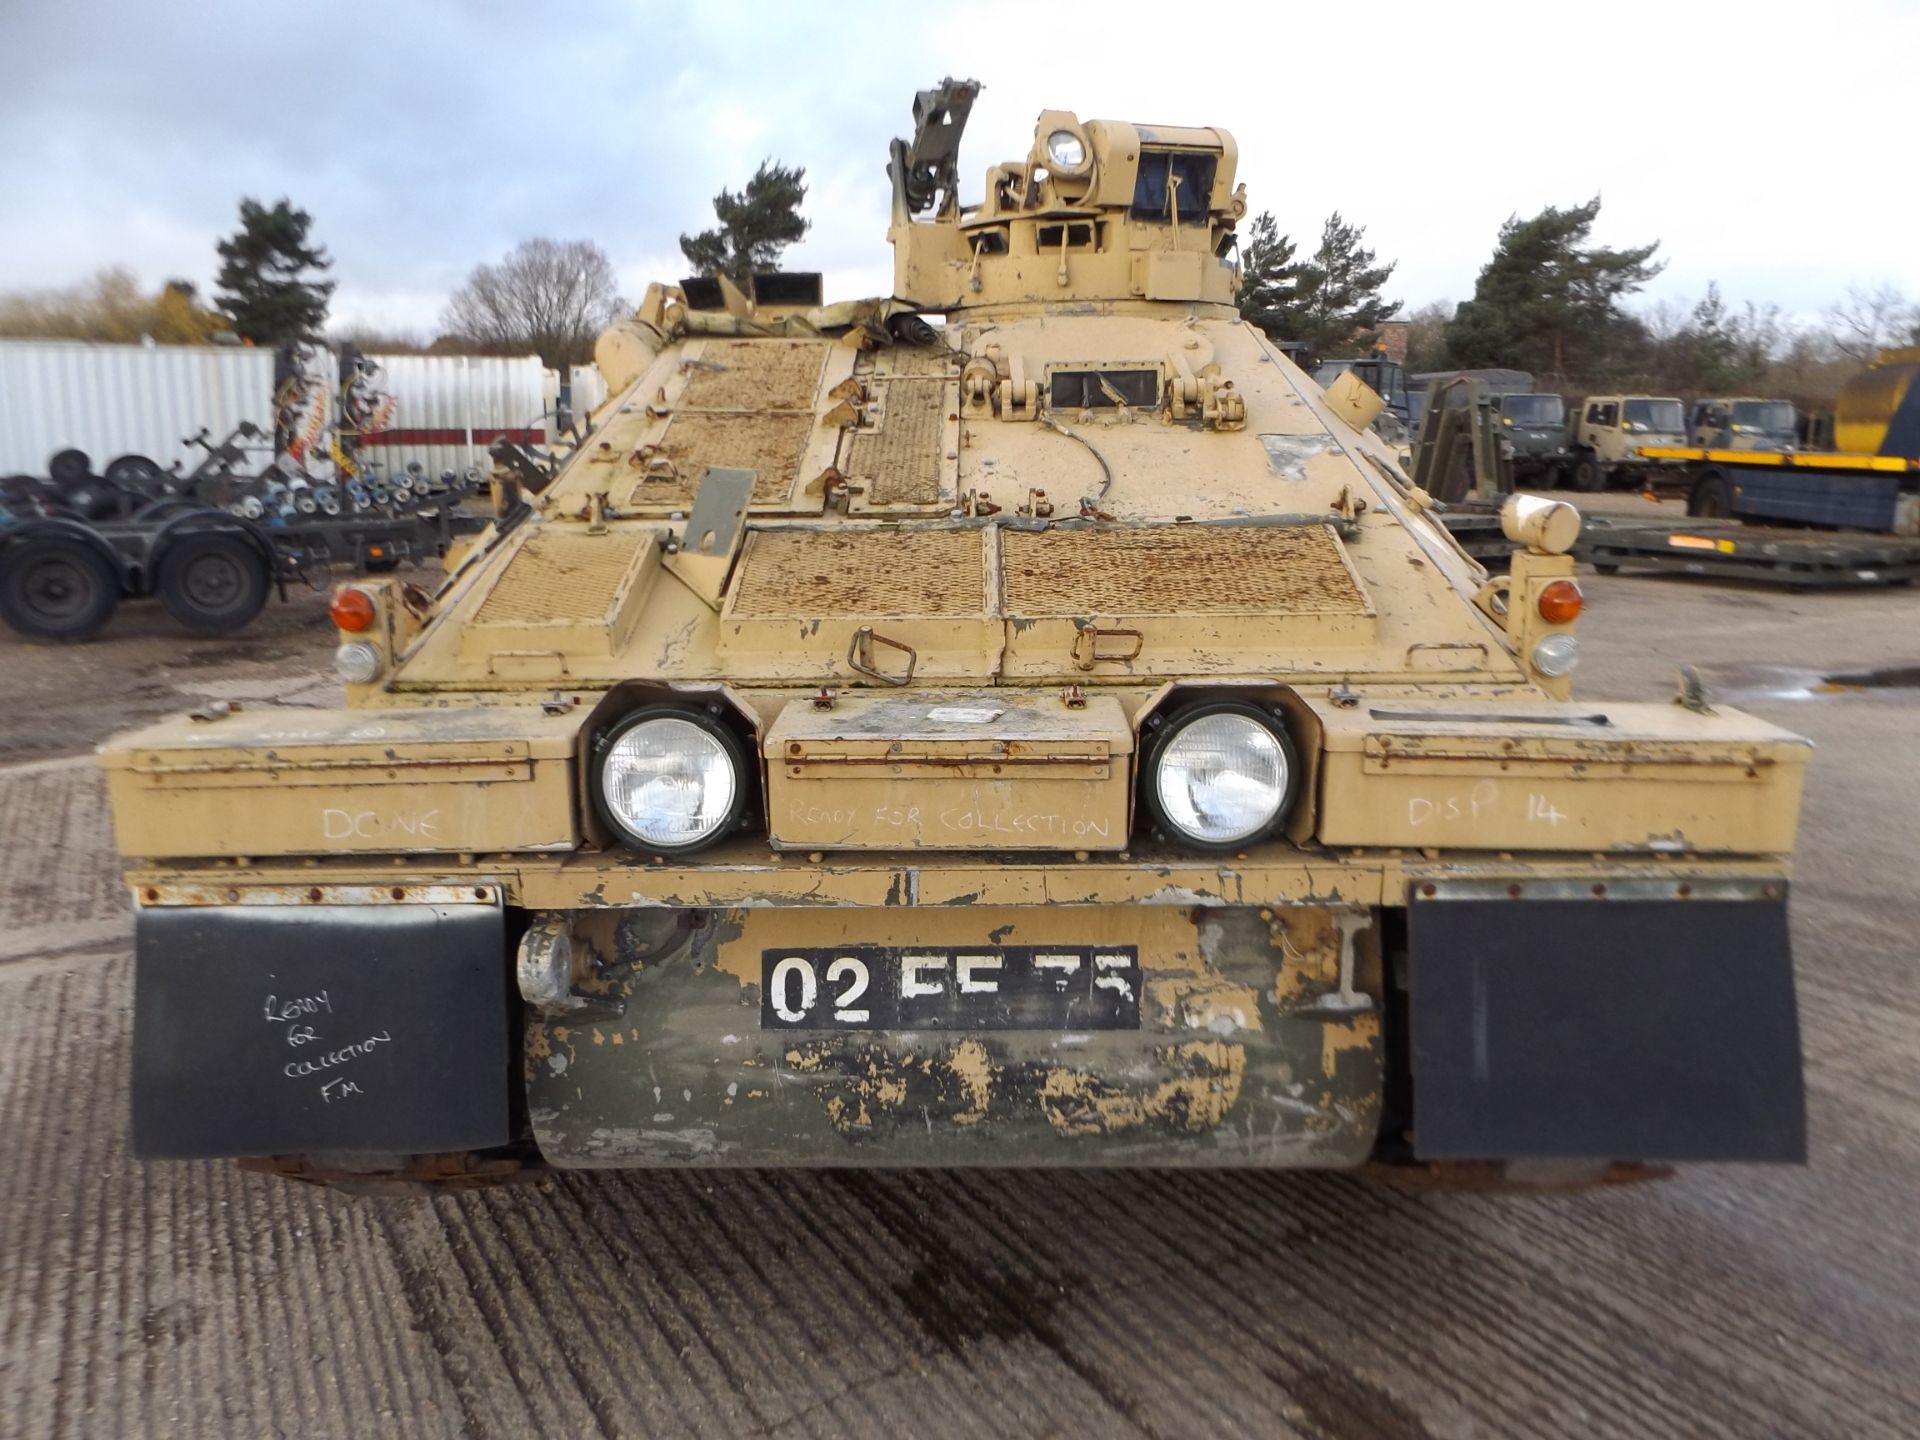 Dieselised CVRT (Combat Vehicle Reconnaissance Tracked) Spartan Armoured Personnel Carrier - Image 2 of 21